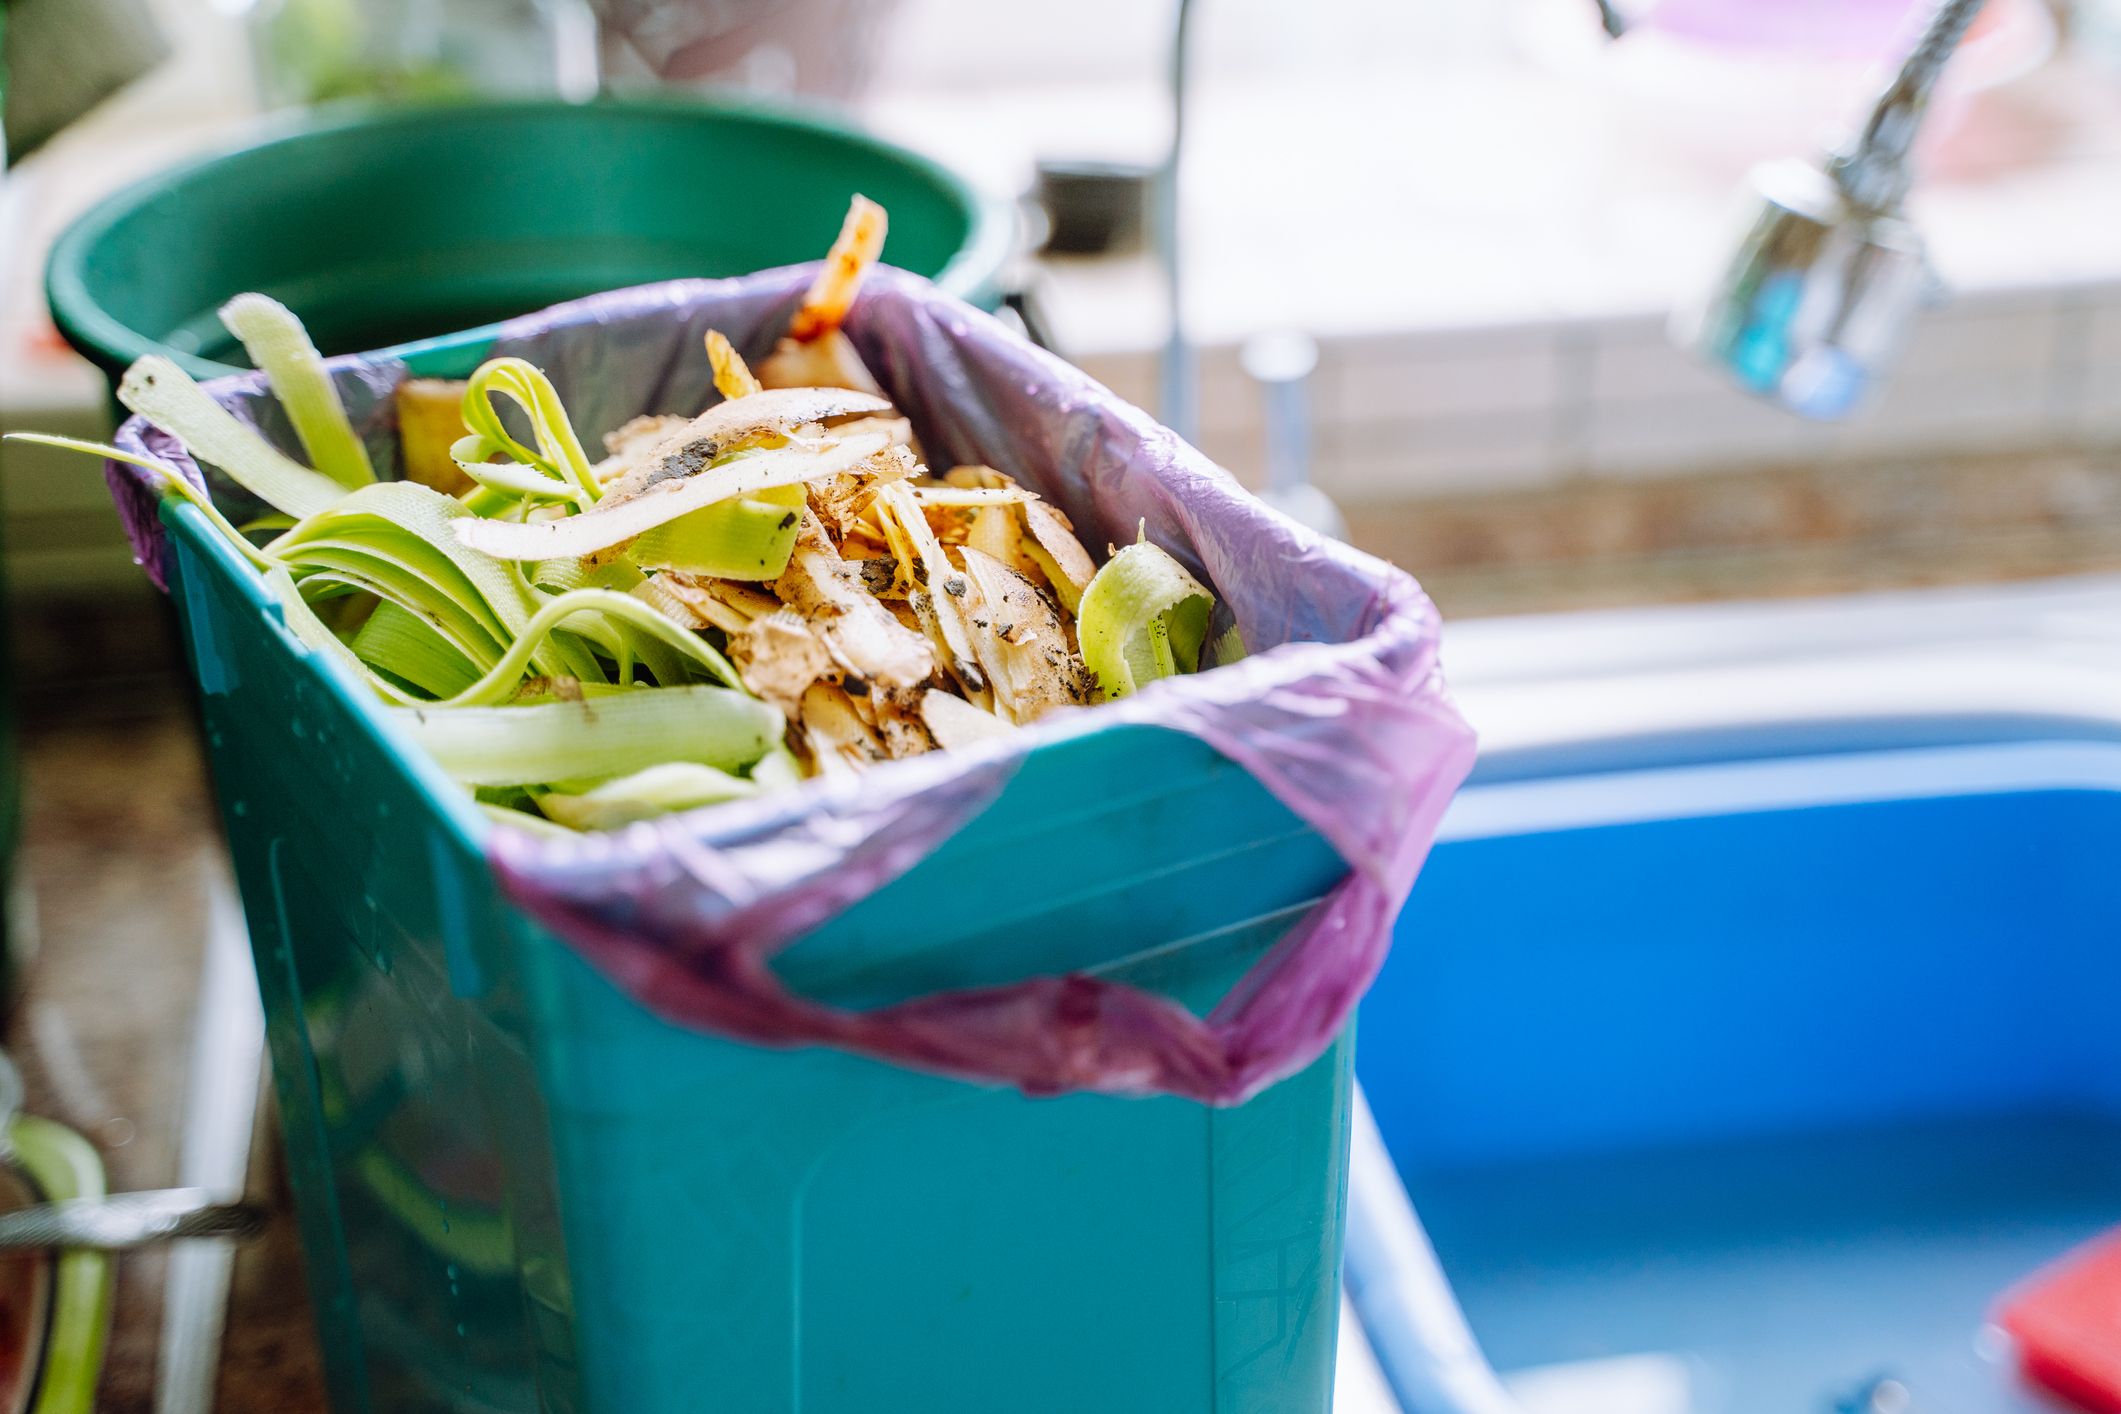 How To Compost At Home  Composting Is An Easy Win - Honestly Modern